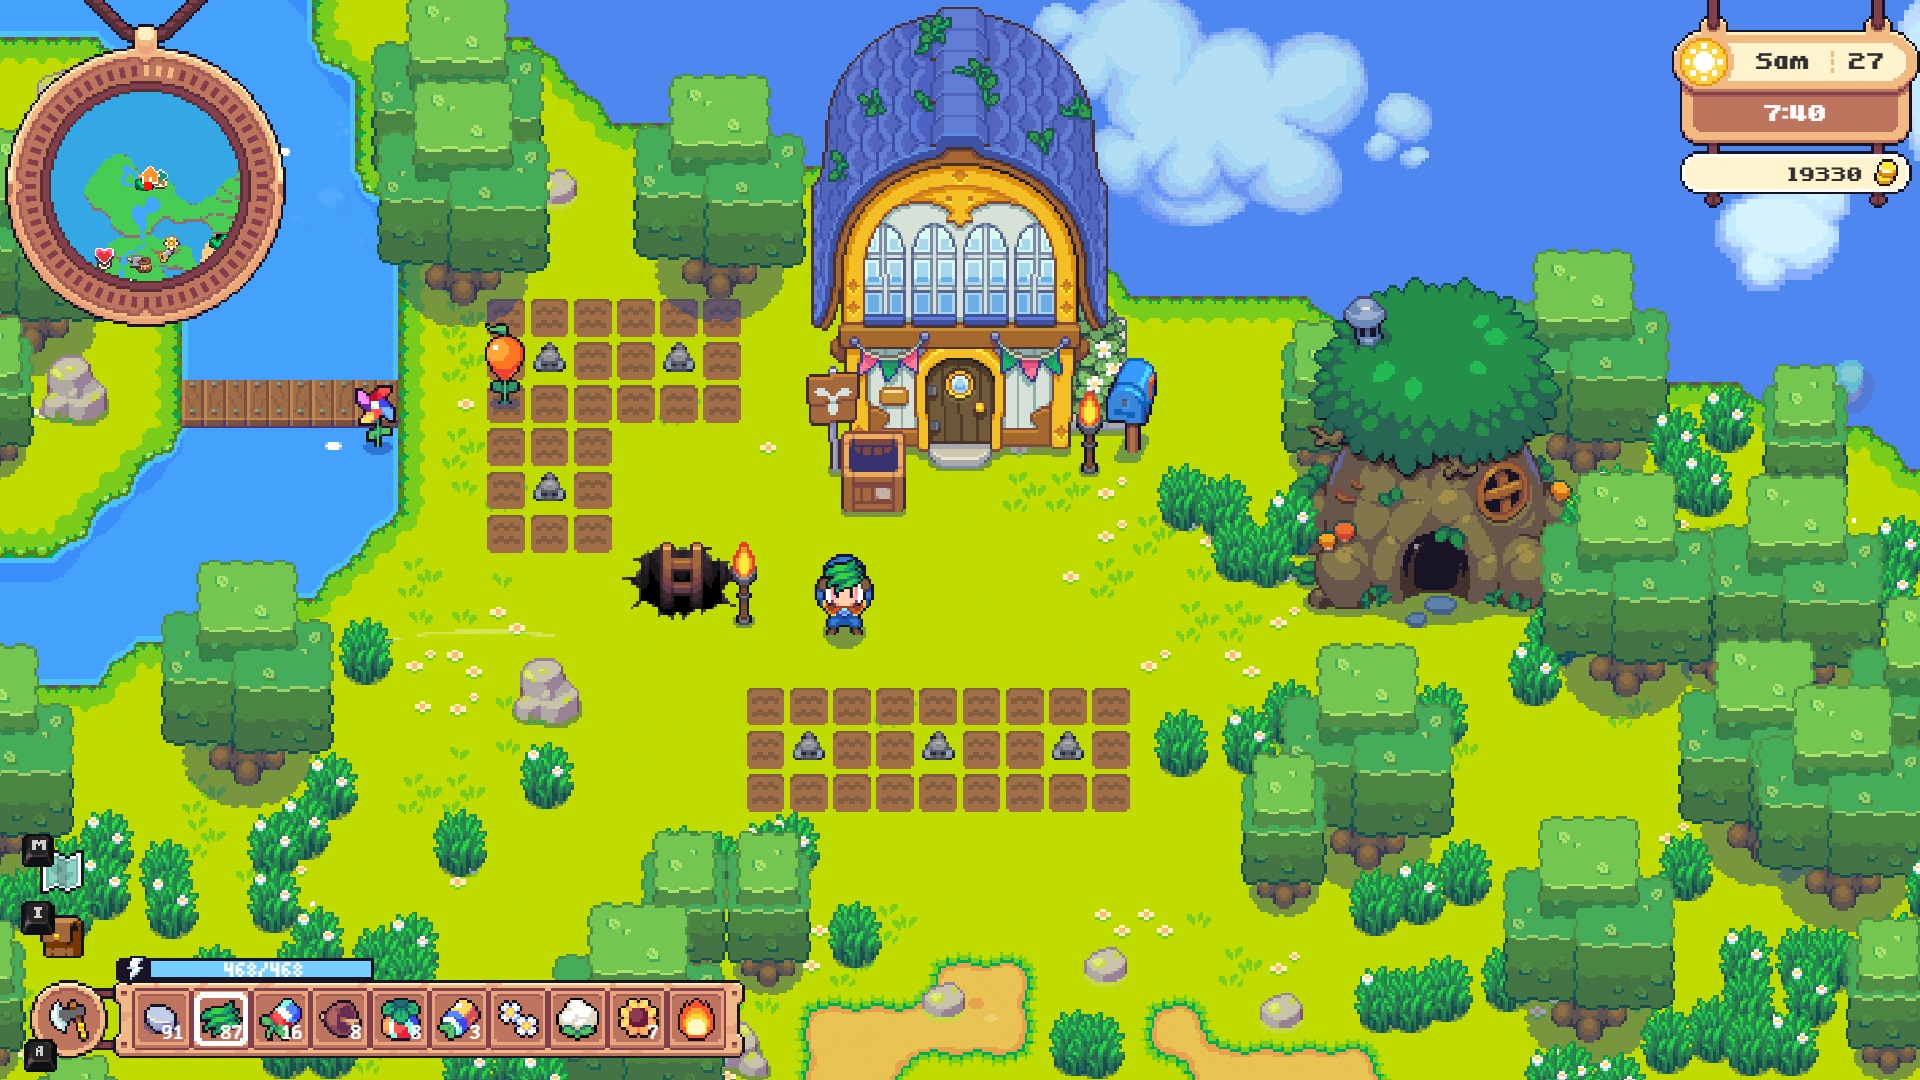 Moonstone island agriculture